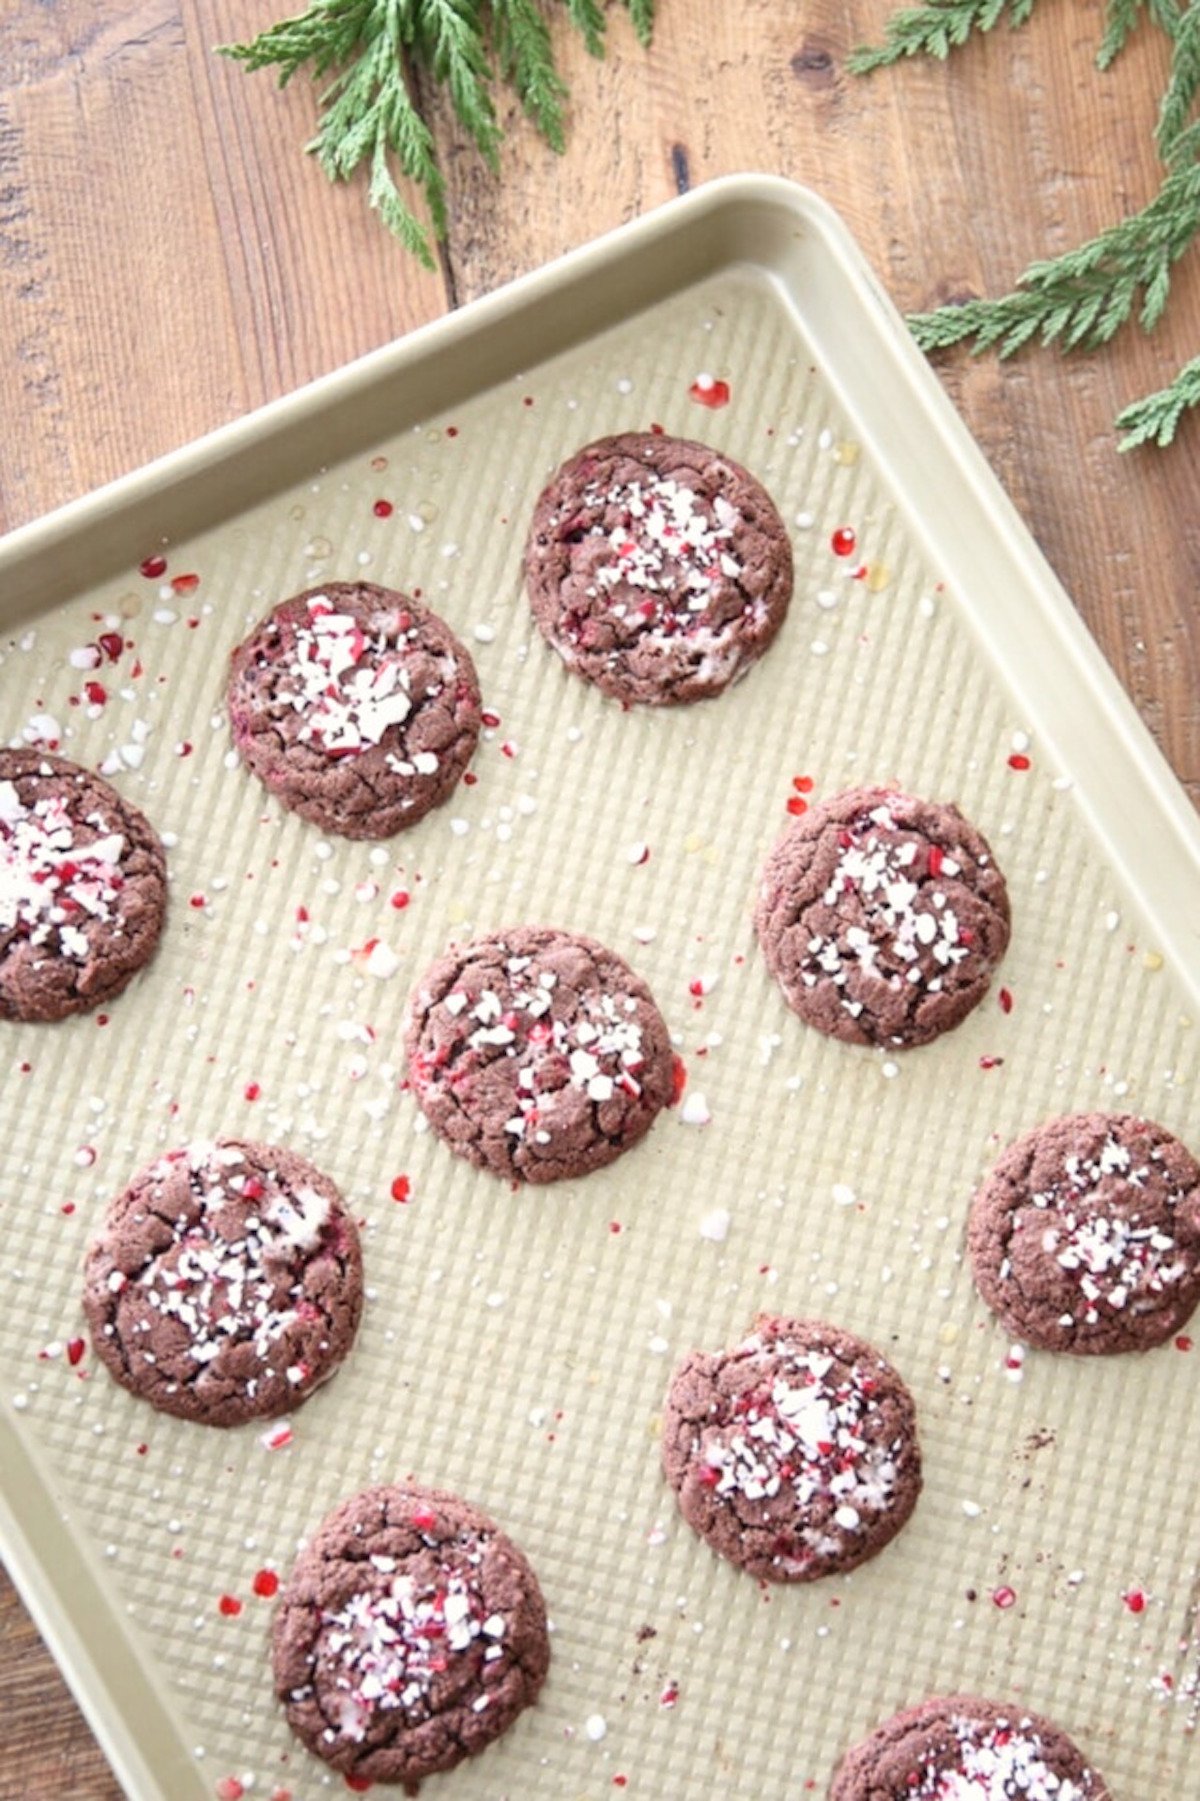 Chocolate peppermint cookies with a delightful peppermint flavor, baked on a sheet.